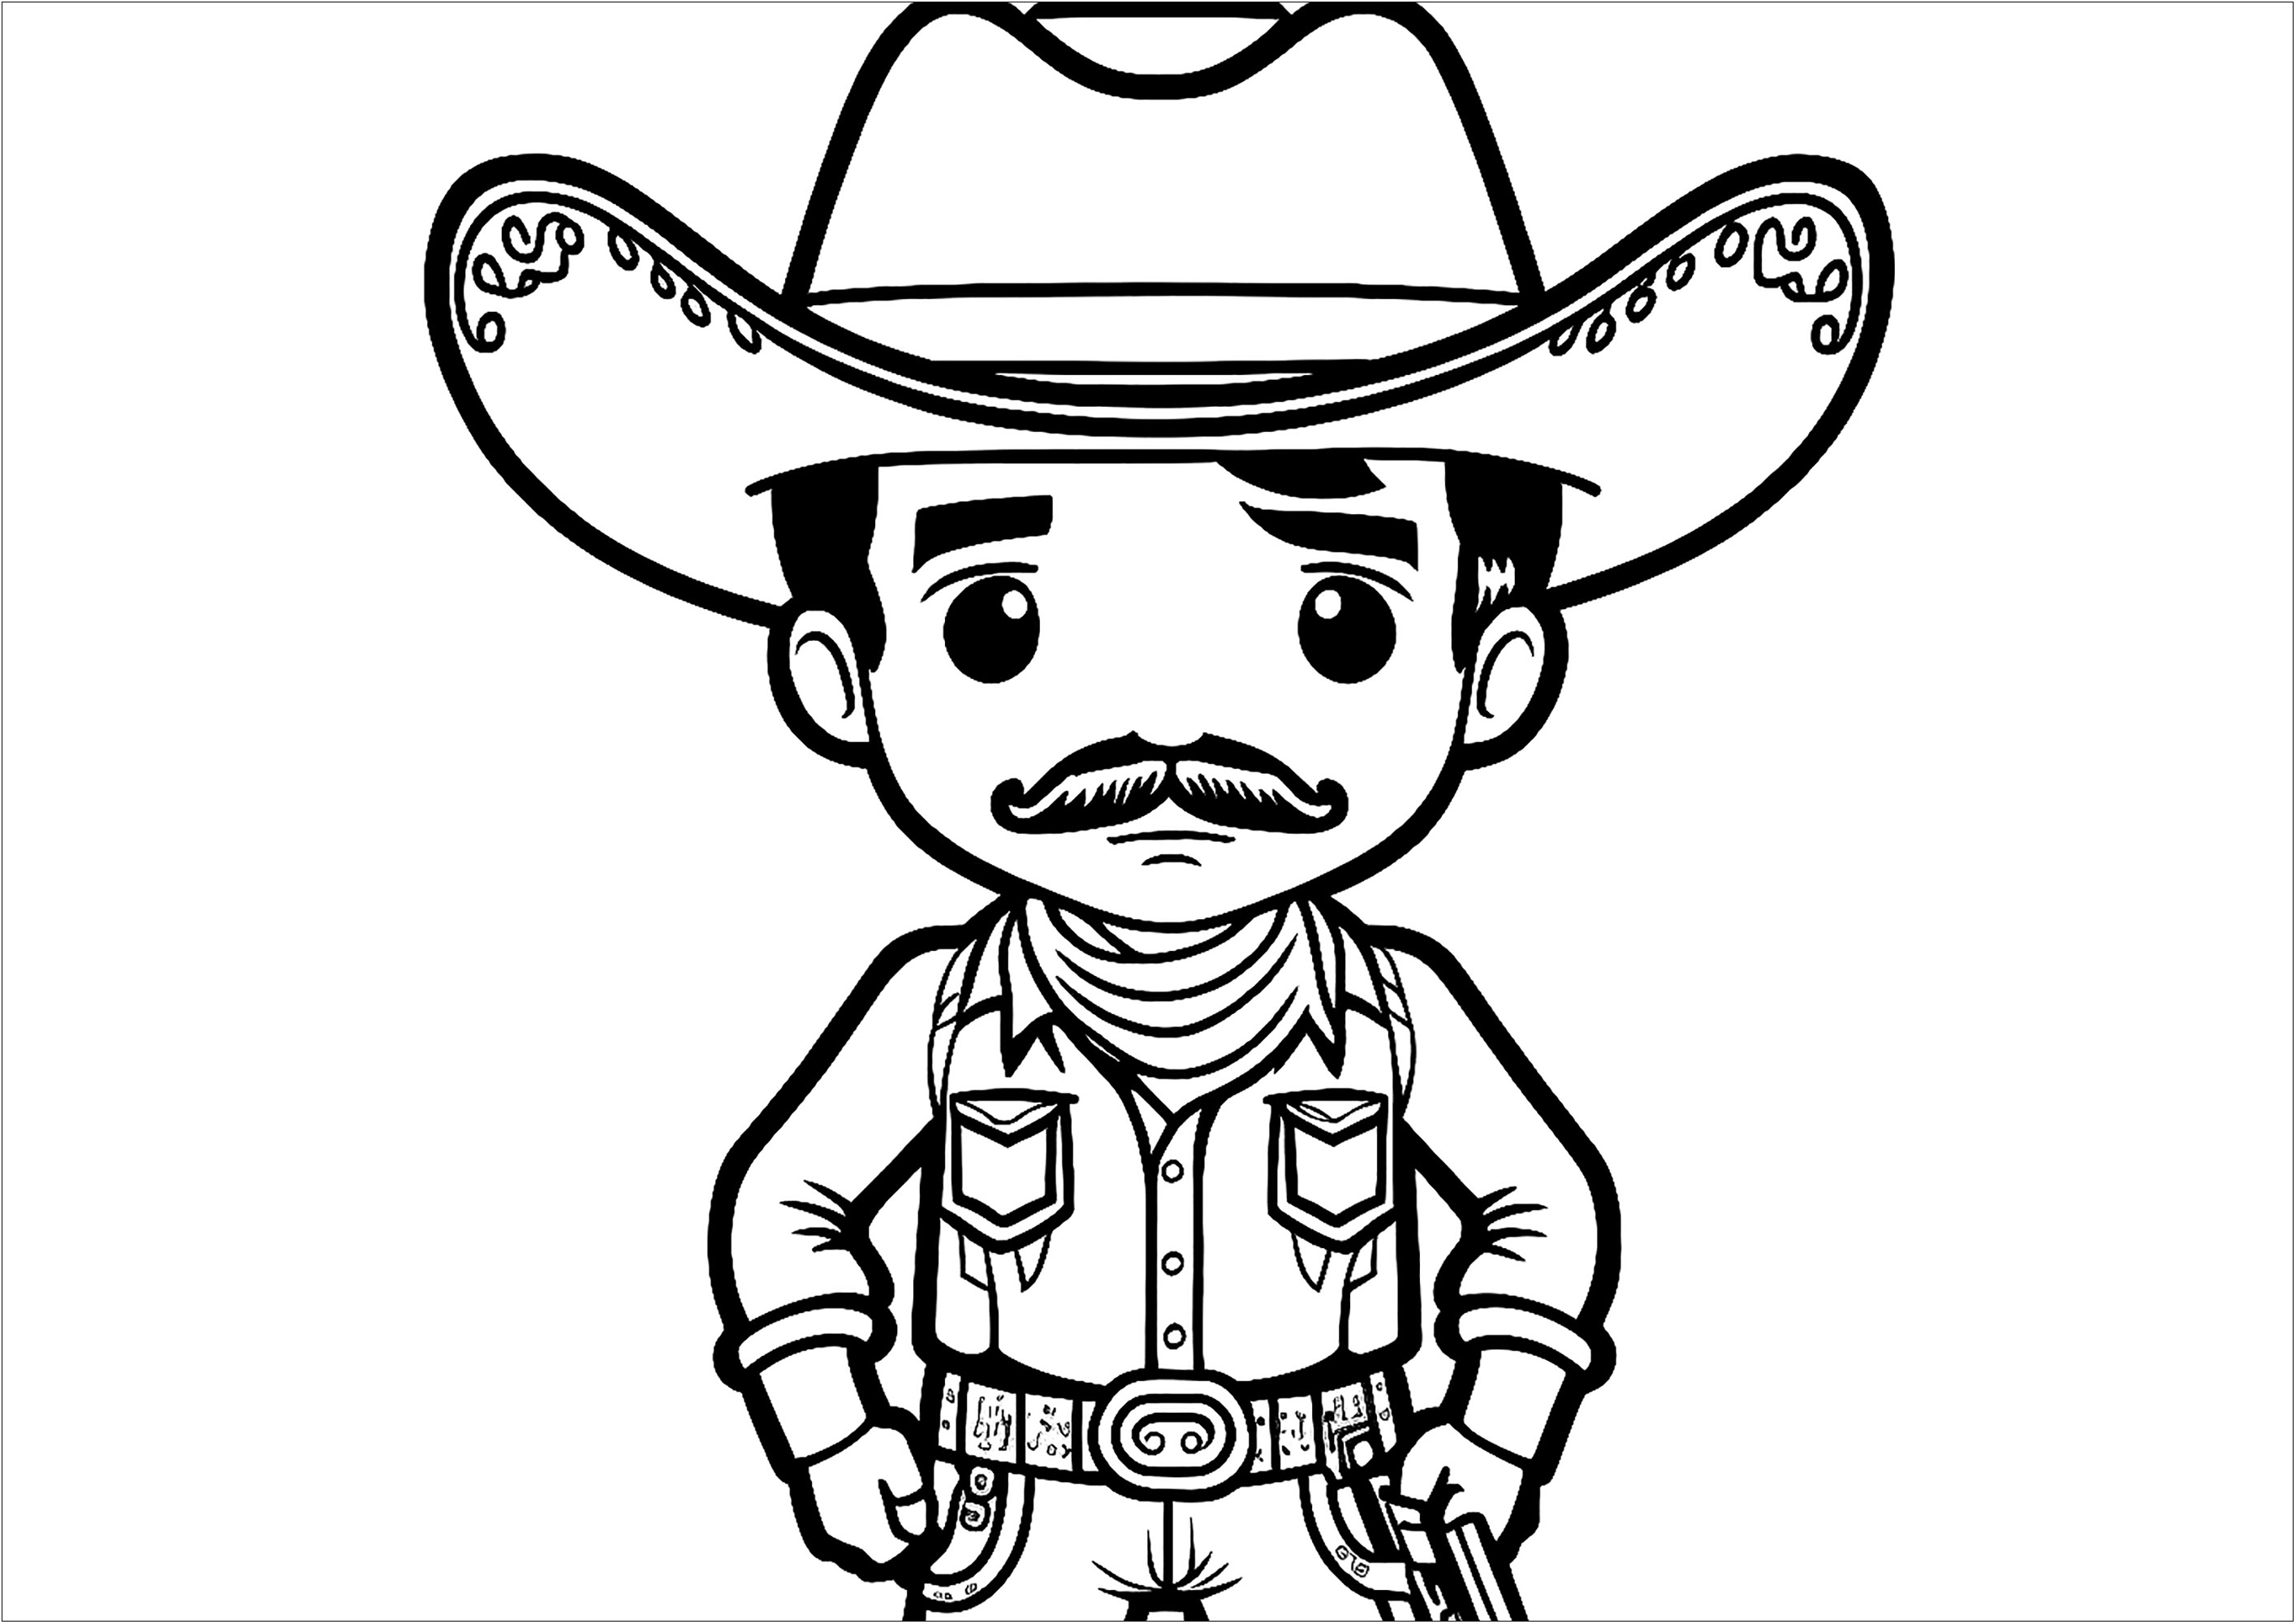 A mustachioed Cowboy drawn with Kawaii style. This coloring page is perfect for kids who like the Kawaii style and are fans of cowboys! It depicts a smiling and happy mustachioed cowboy, dressed in a hat, shirt, jeans.Kids will love to color this mustachioed cowboy, who will probably remind them of their own dad or grandpa!